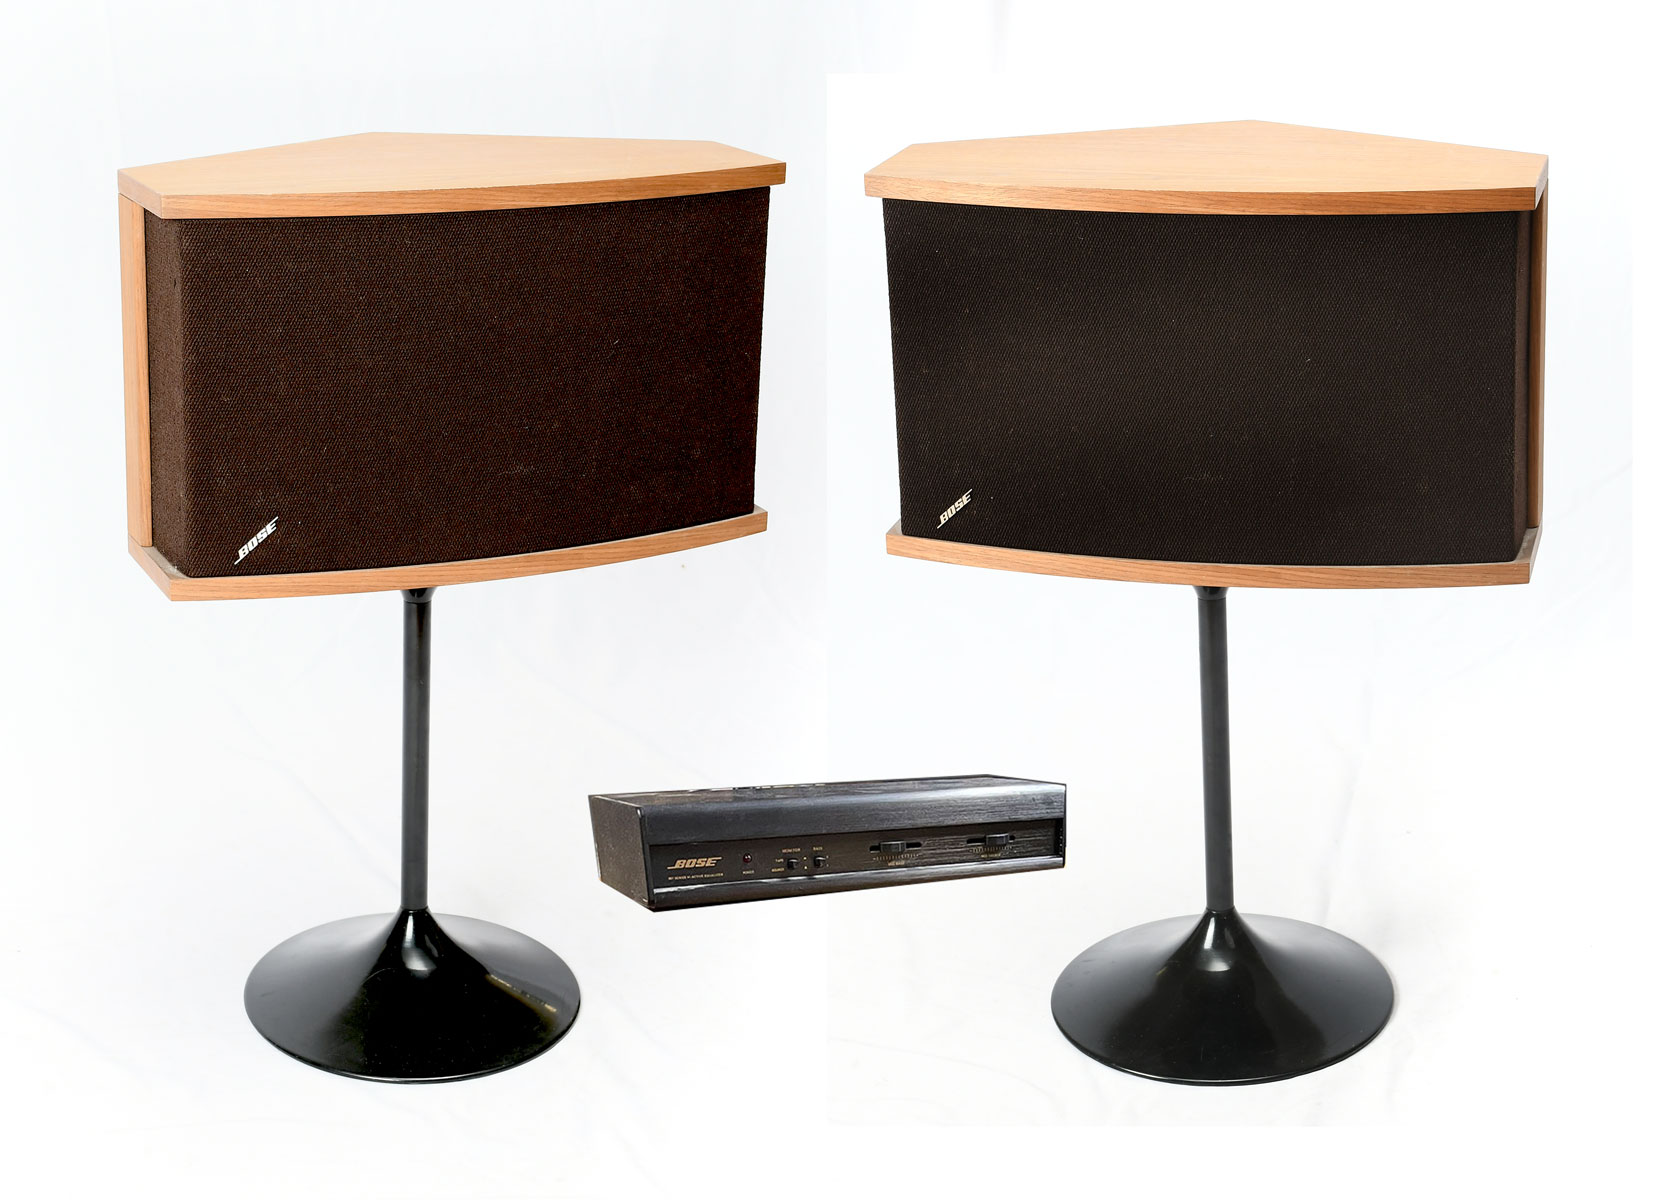 PAIR BOSE 901 SPEAKERS WITH STANDS: